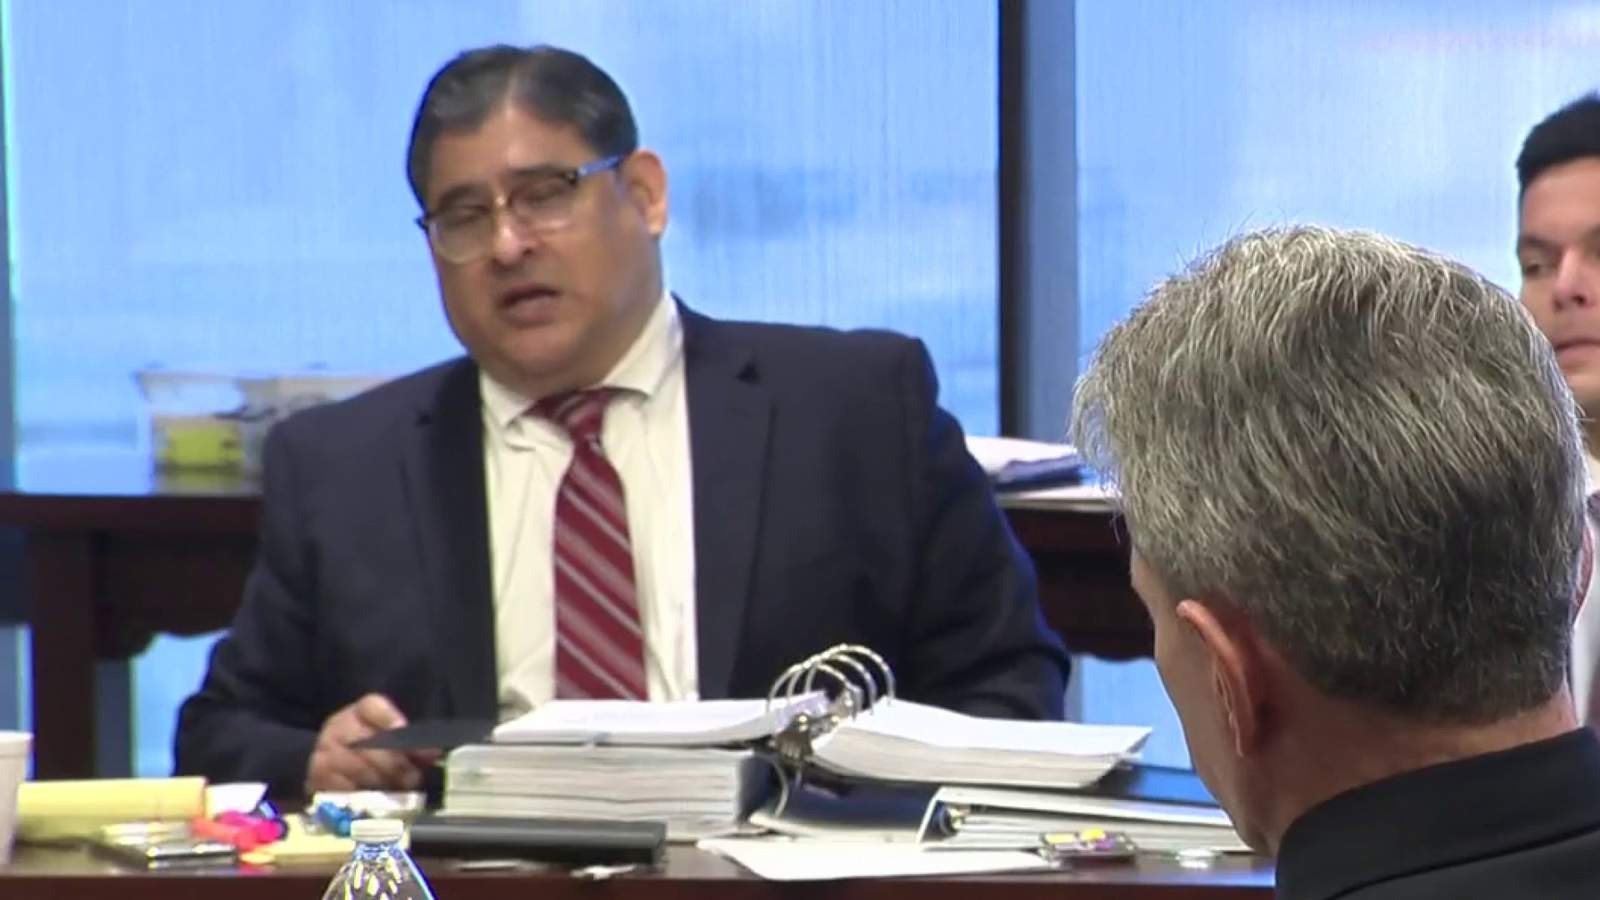 SAPD Chief William McManus defends decision to fire officer involved in feces ‘prank’